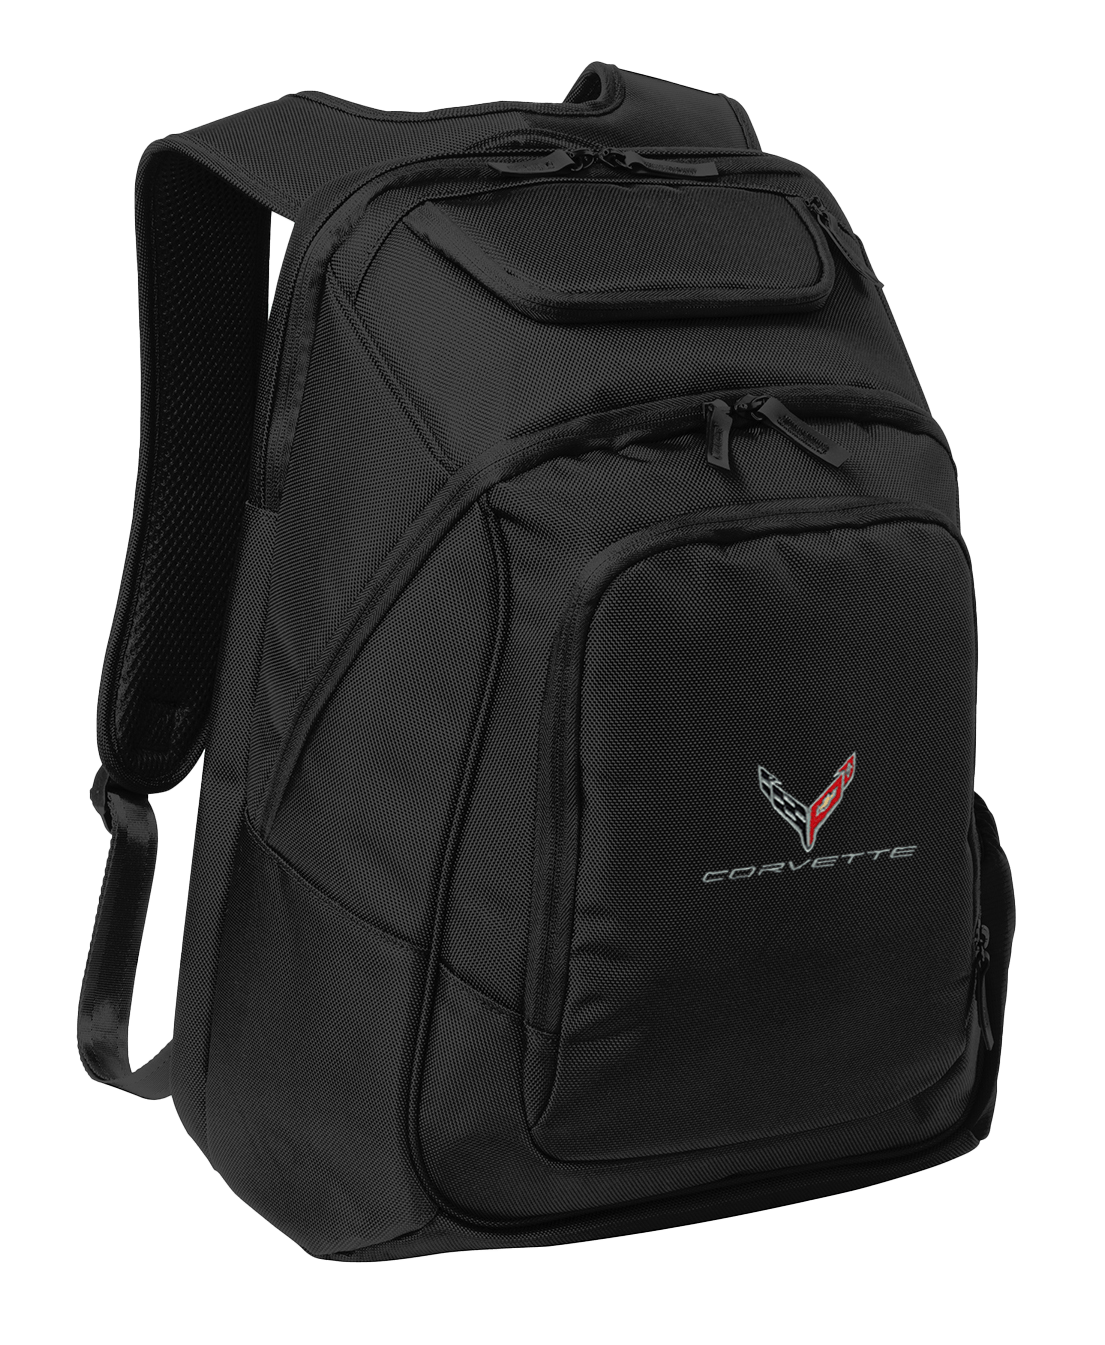 C8 Corvette Embroidered Backpack